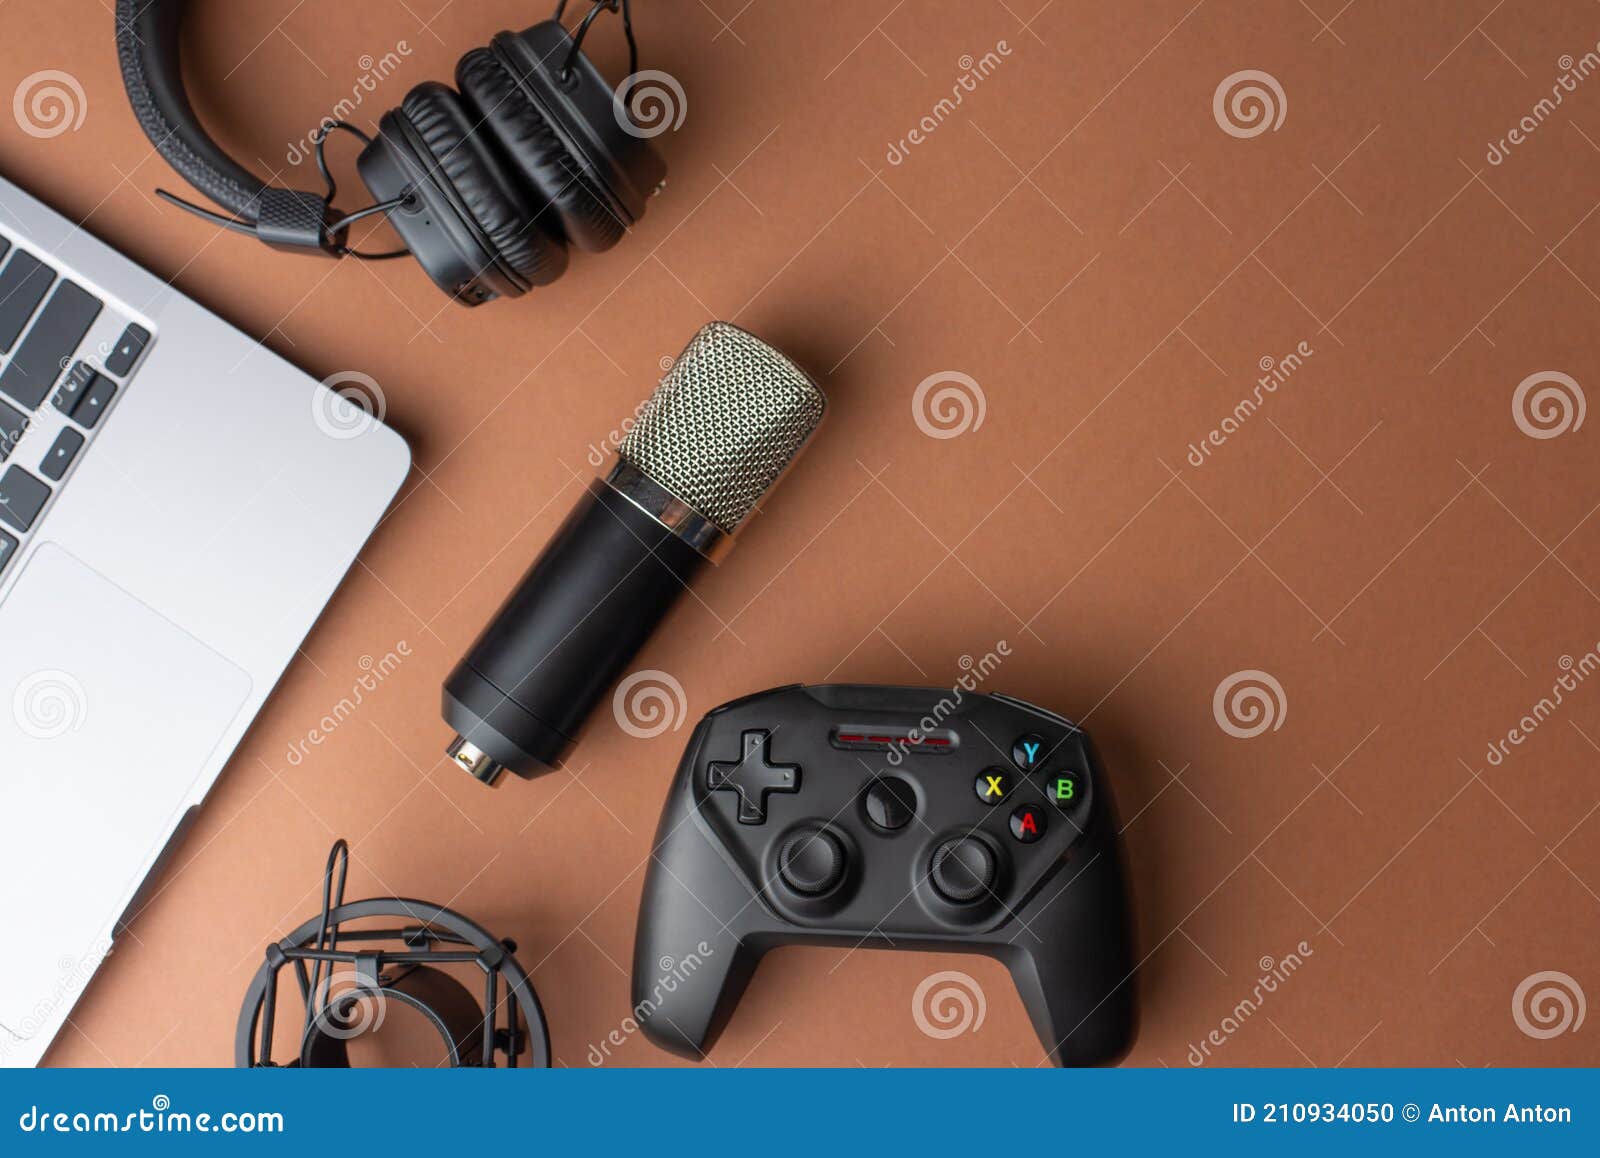 Banquete Muñeco de peluche Puerto Microphone and Headphones Studio Laptop and Camera Joystick or Gamepad on  the Background, Blogger, Stream, Gamer Playing Radio and Stock Photo -  Image of earphones, accessory: 210934050